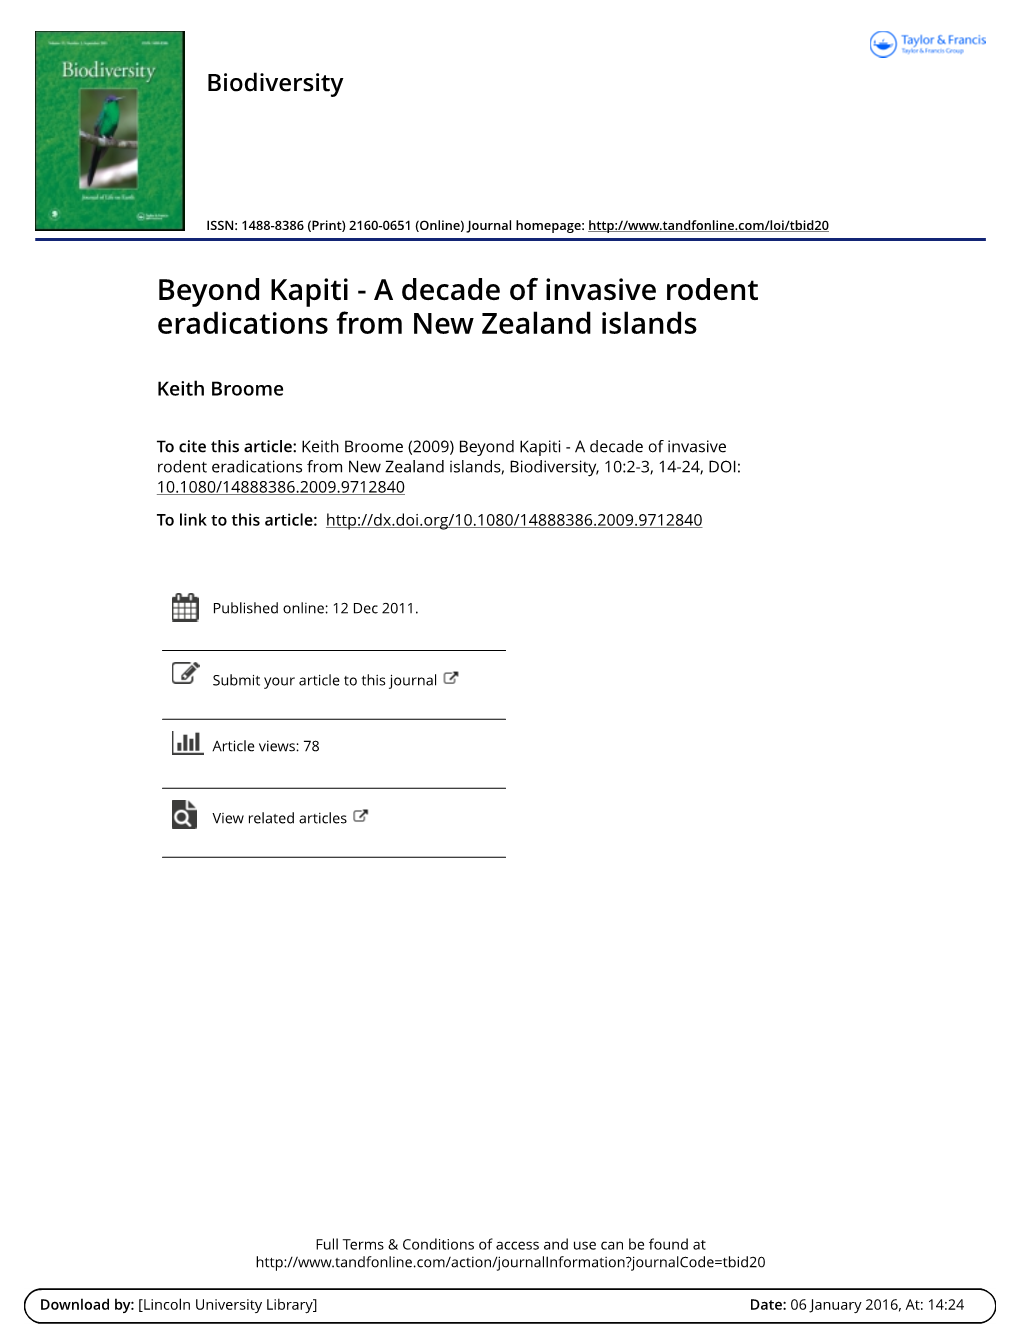 A Decade of Invasive Rodent Eradications from New Zealand Islands